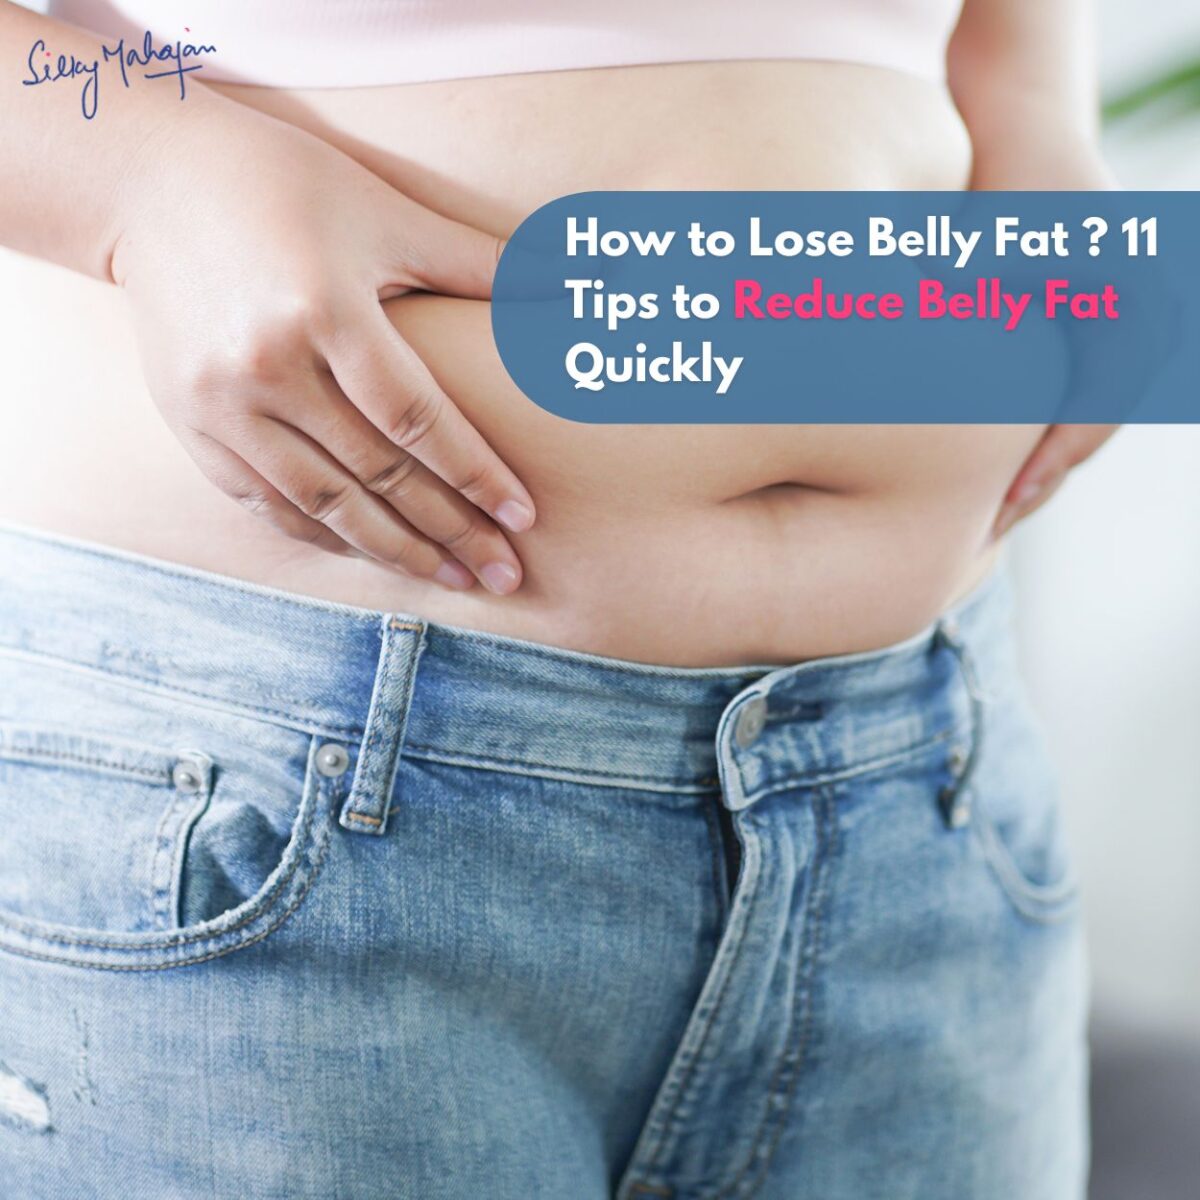 How to Lose Belly Fat ? 11 Lifestyle Changes for a Healthier You